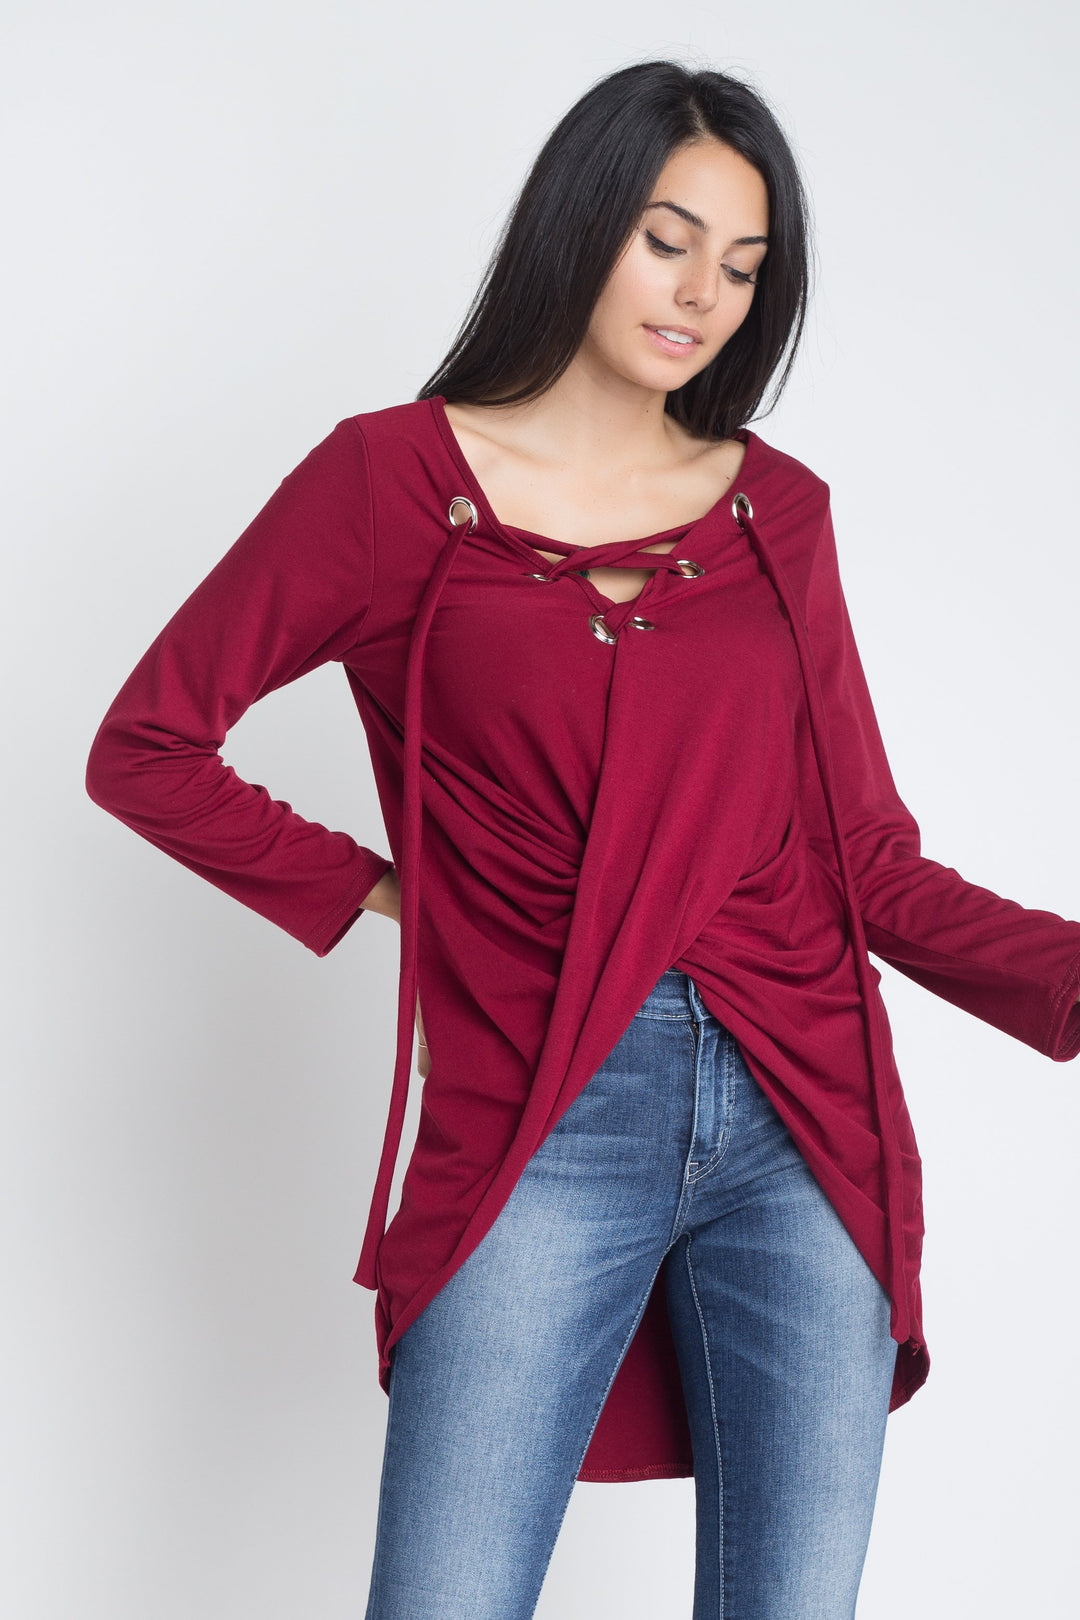 Women's Lace Up Wrap Long Sleeve Top.